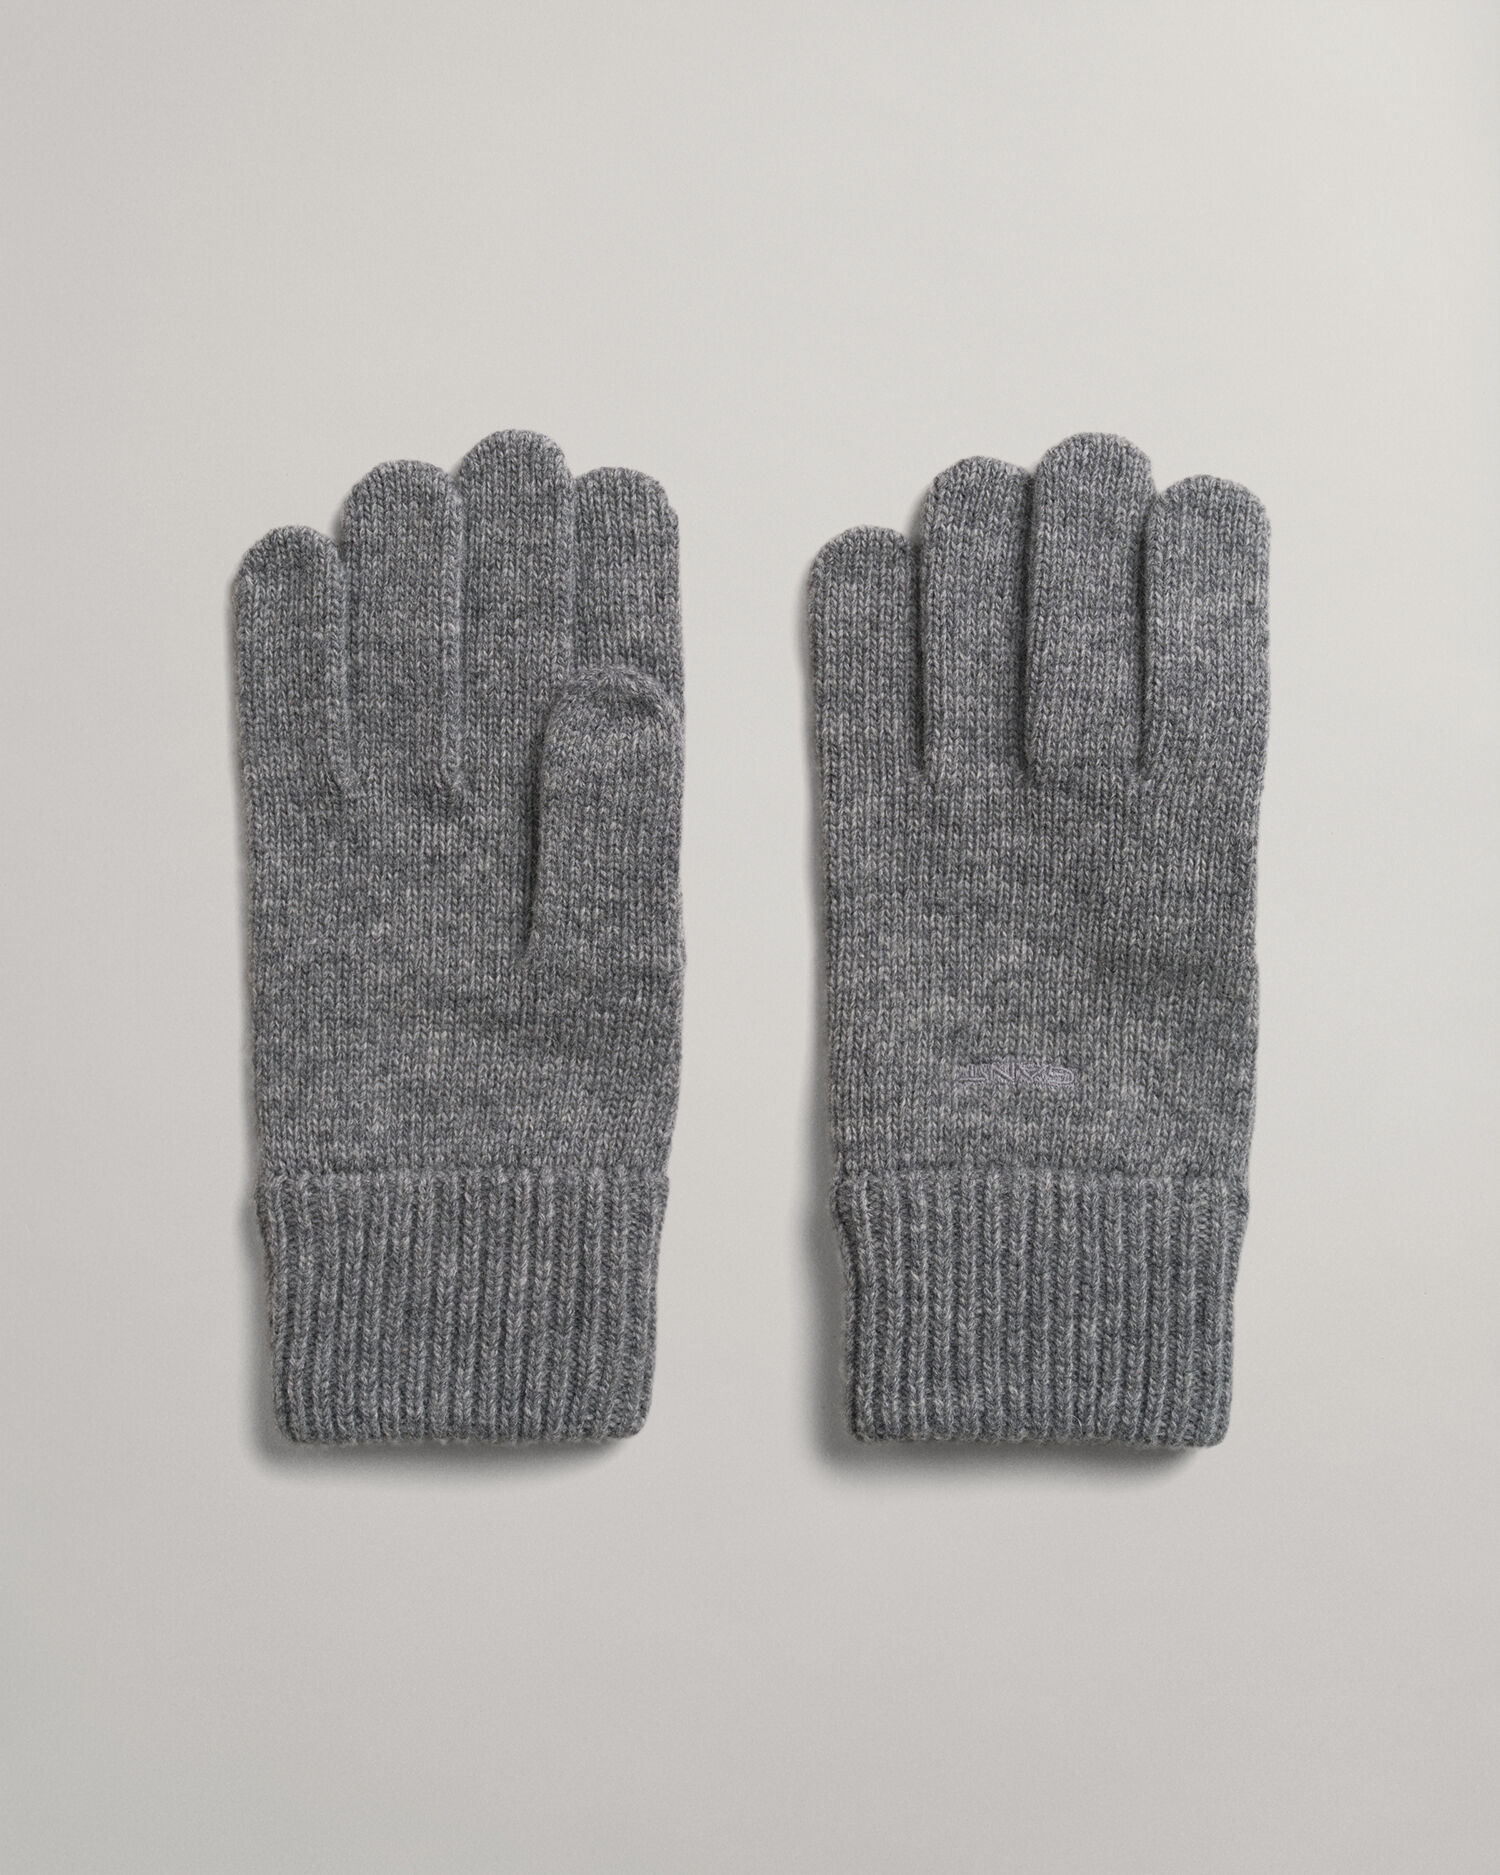 GANT Knitted Wool Gloves in Marine Blue Mens Accessories Gloves for Men 